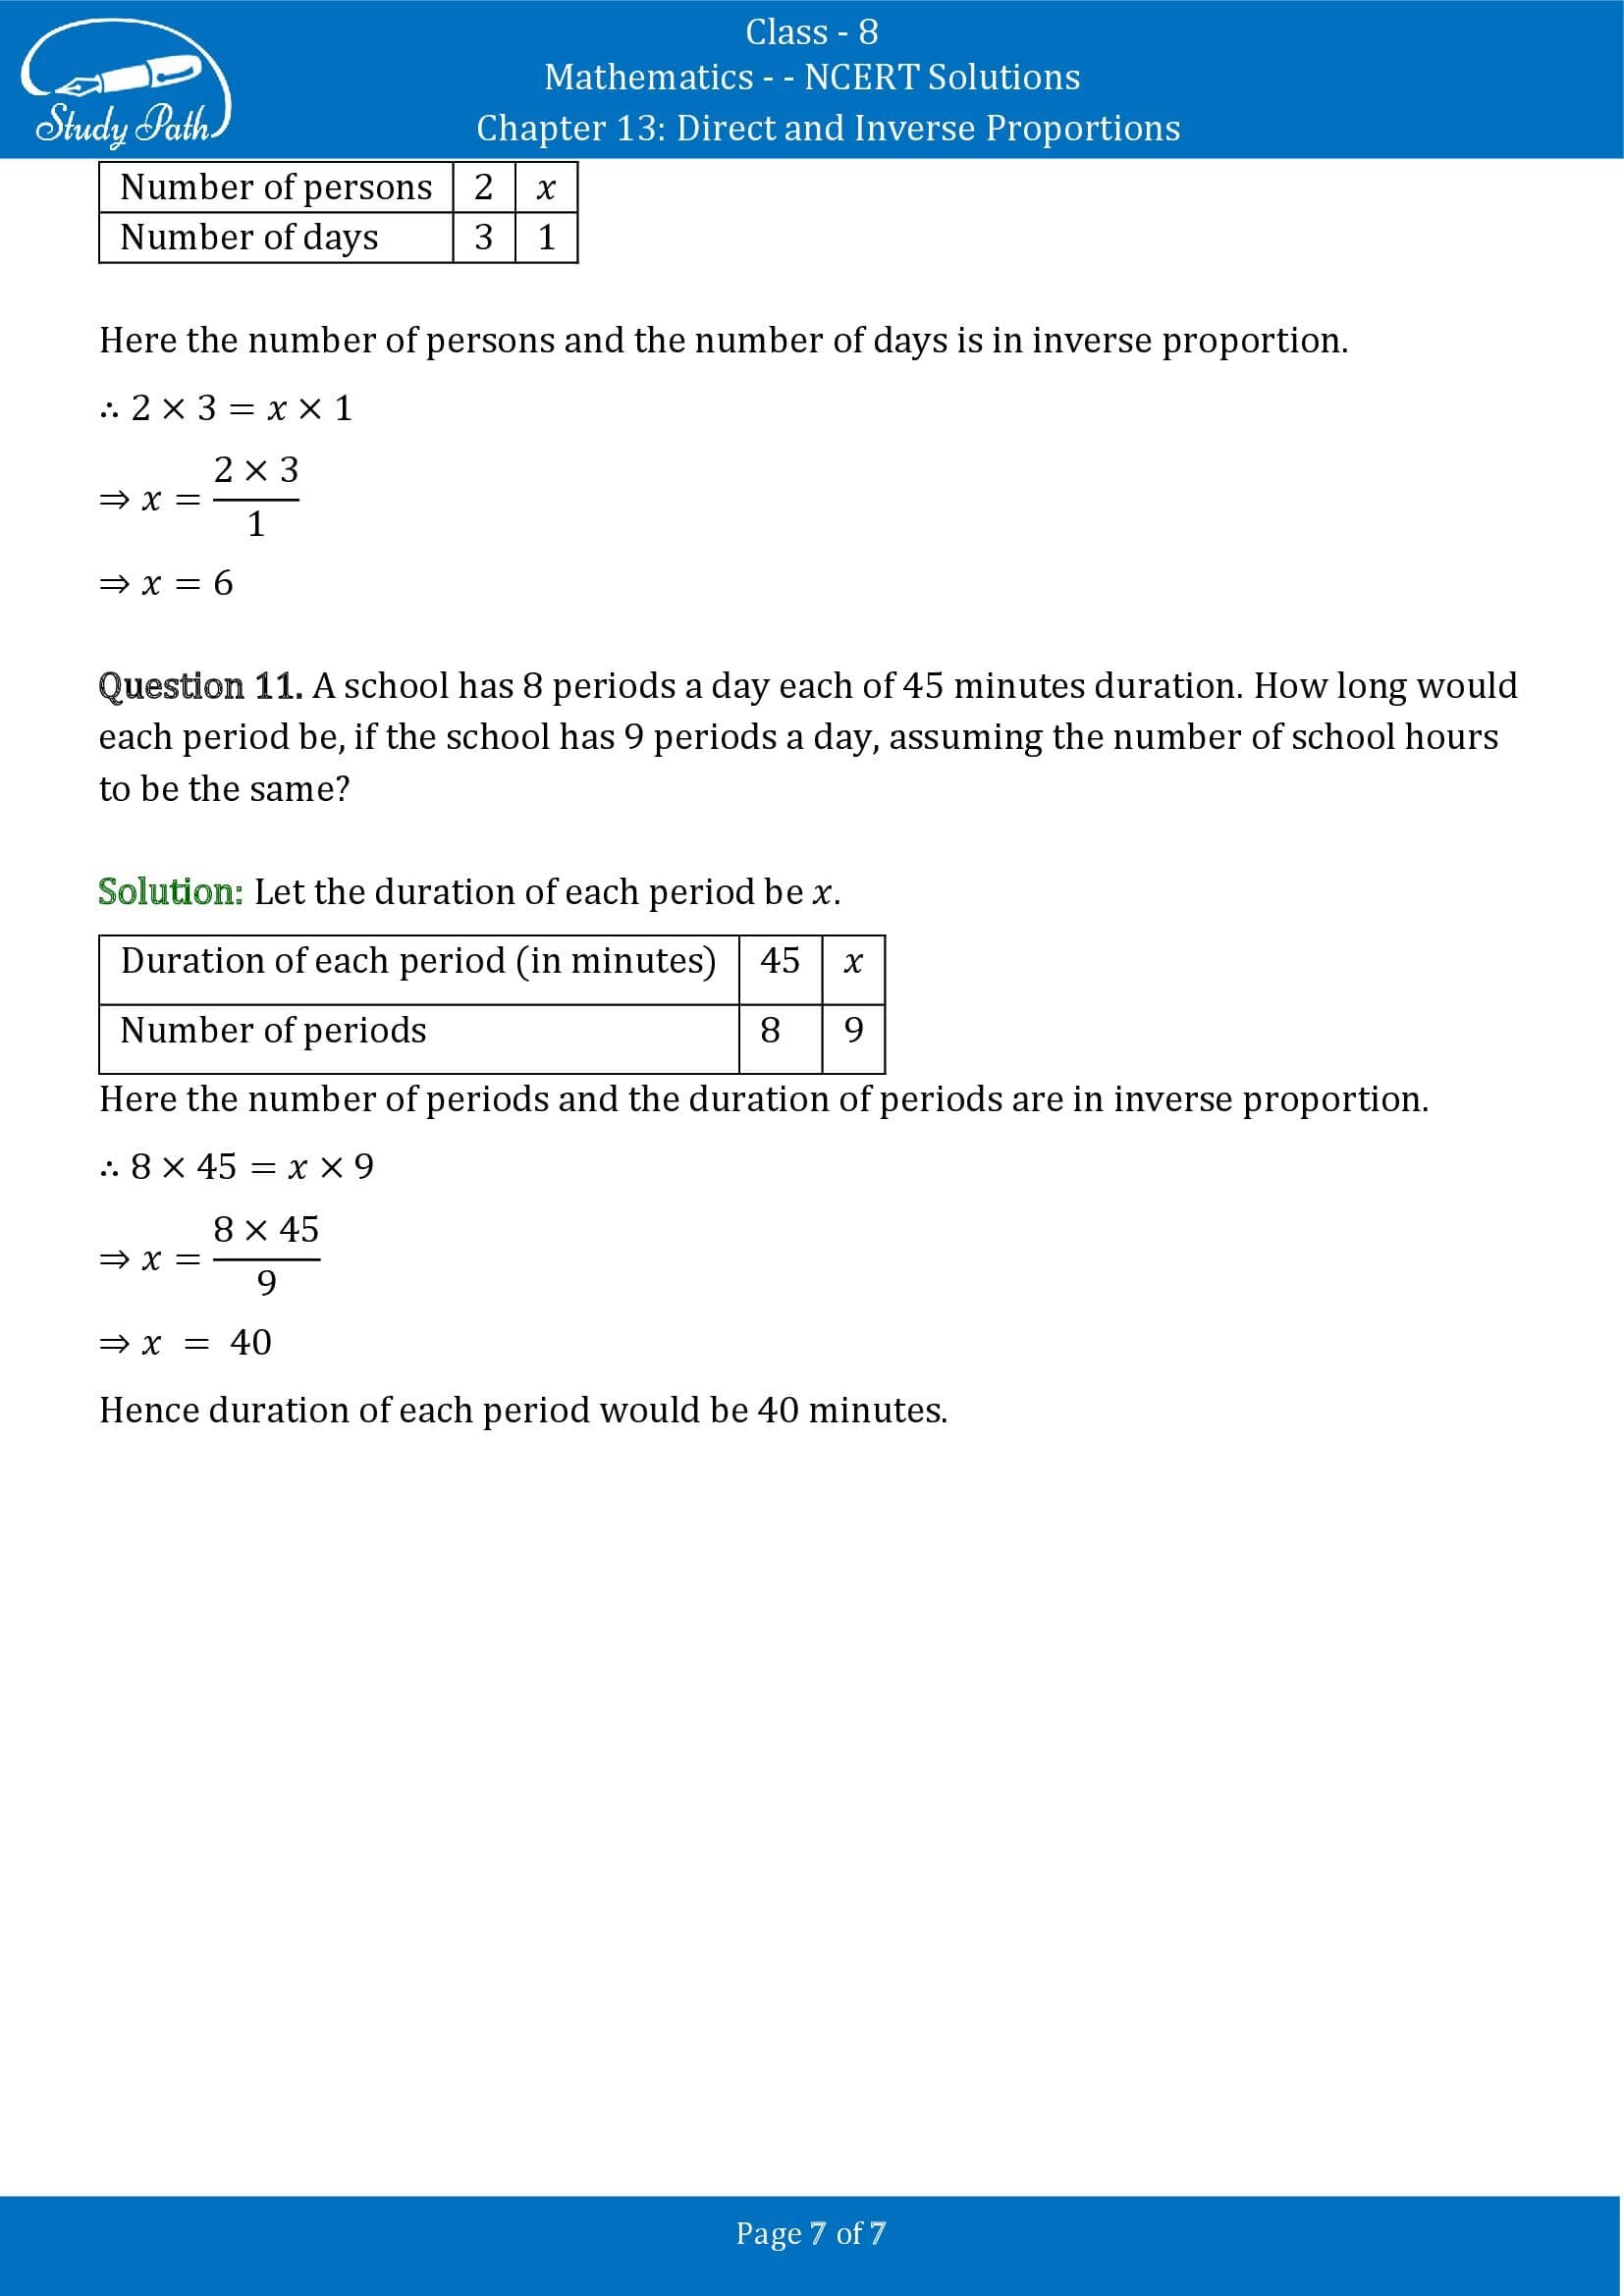 NCERT Solutions for Class 8 Maths Chapter 13 Direct and Inverse Proportions Exercise 13.2 00007